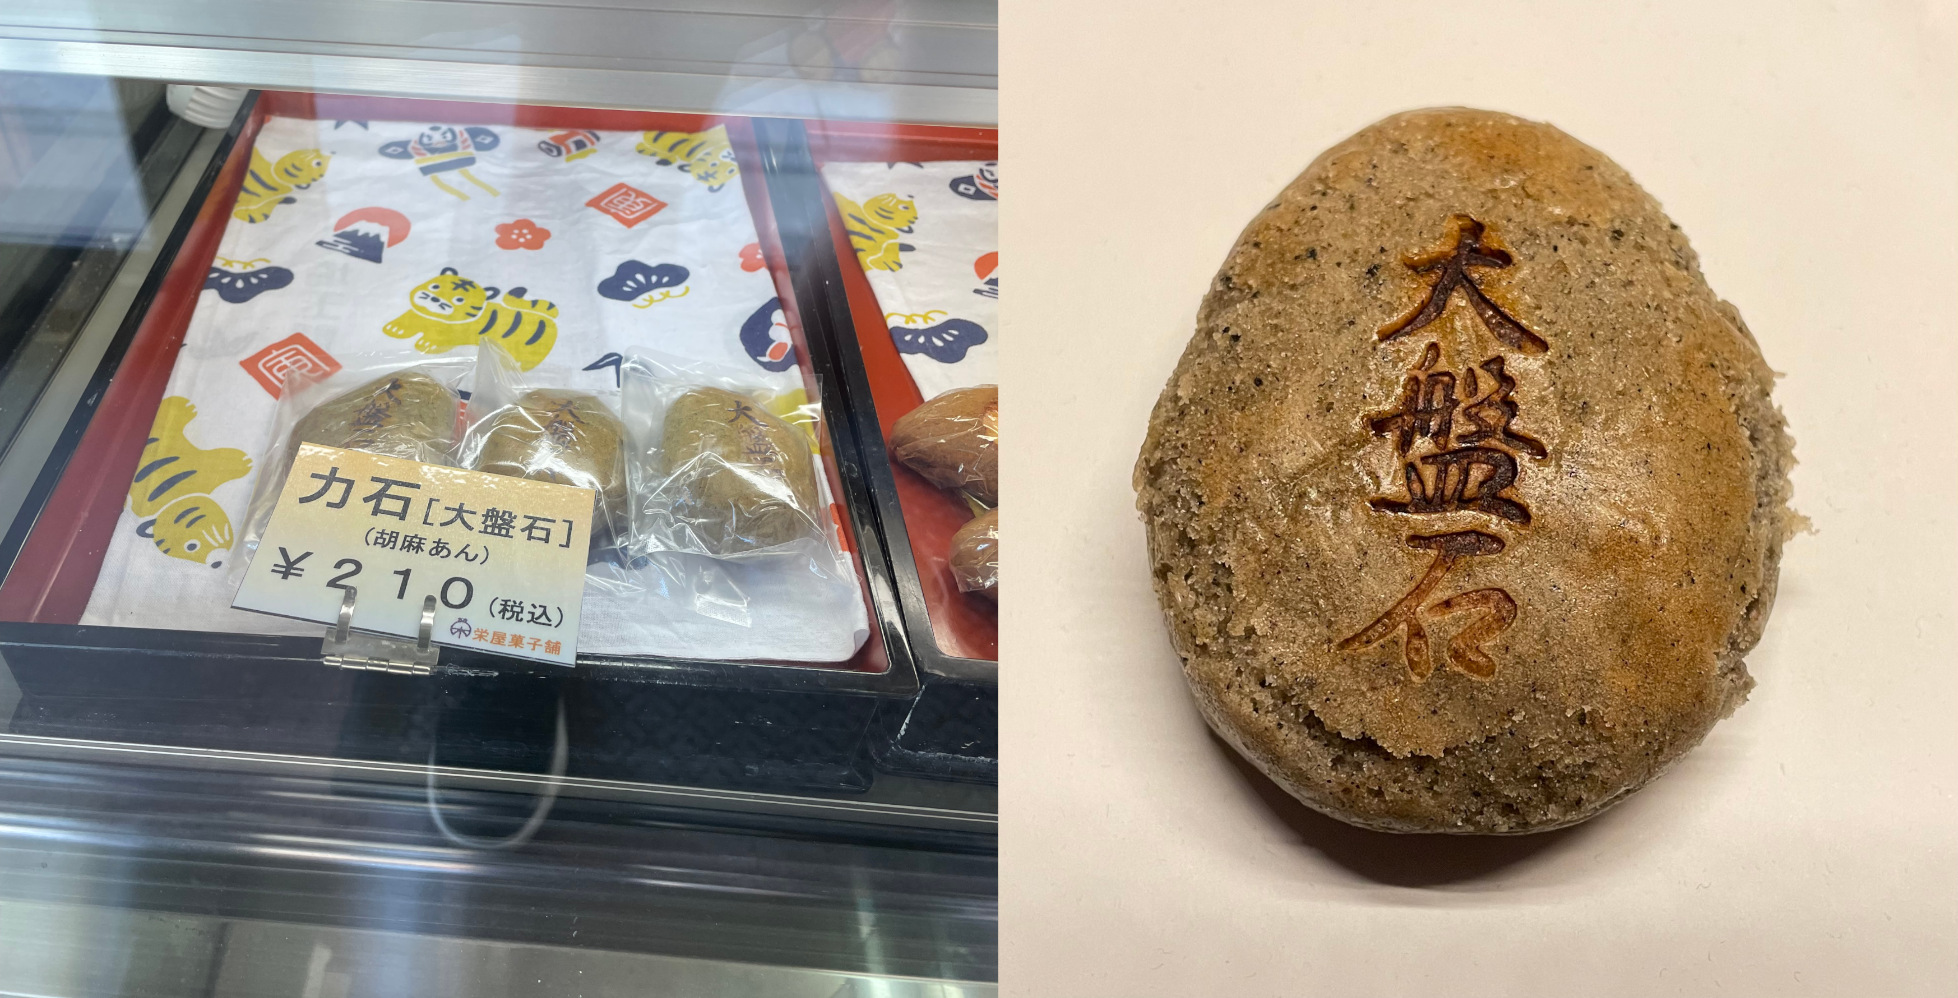 The left side of the image shows three Manju replicas of the stone on display in a Japanese sweet shop for ￥210 each. The right side shows one of the Manju up close, highlighting the branded 大盤石 kanji.